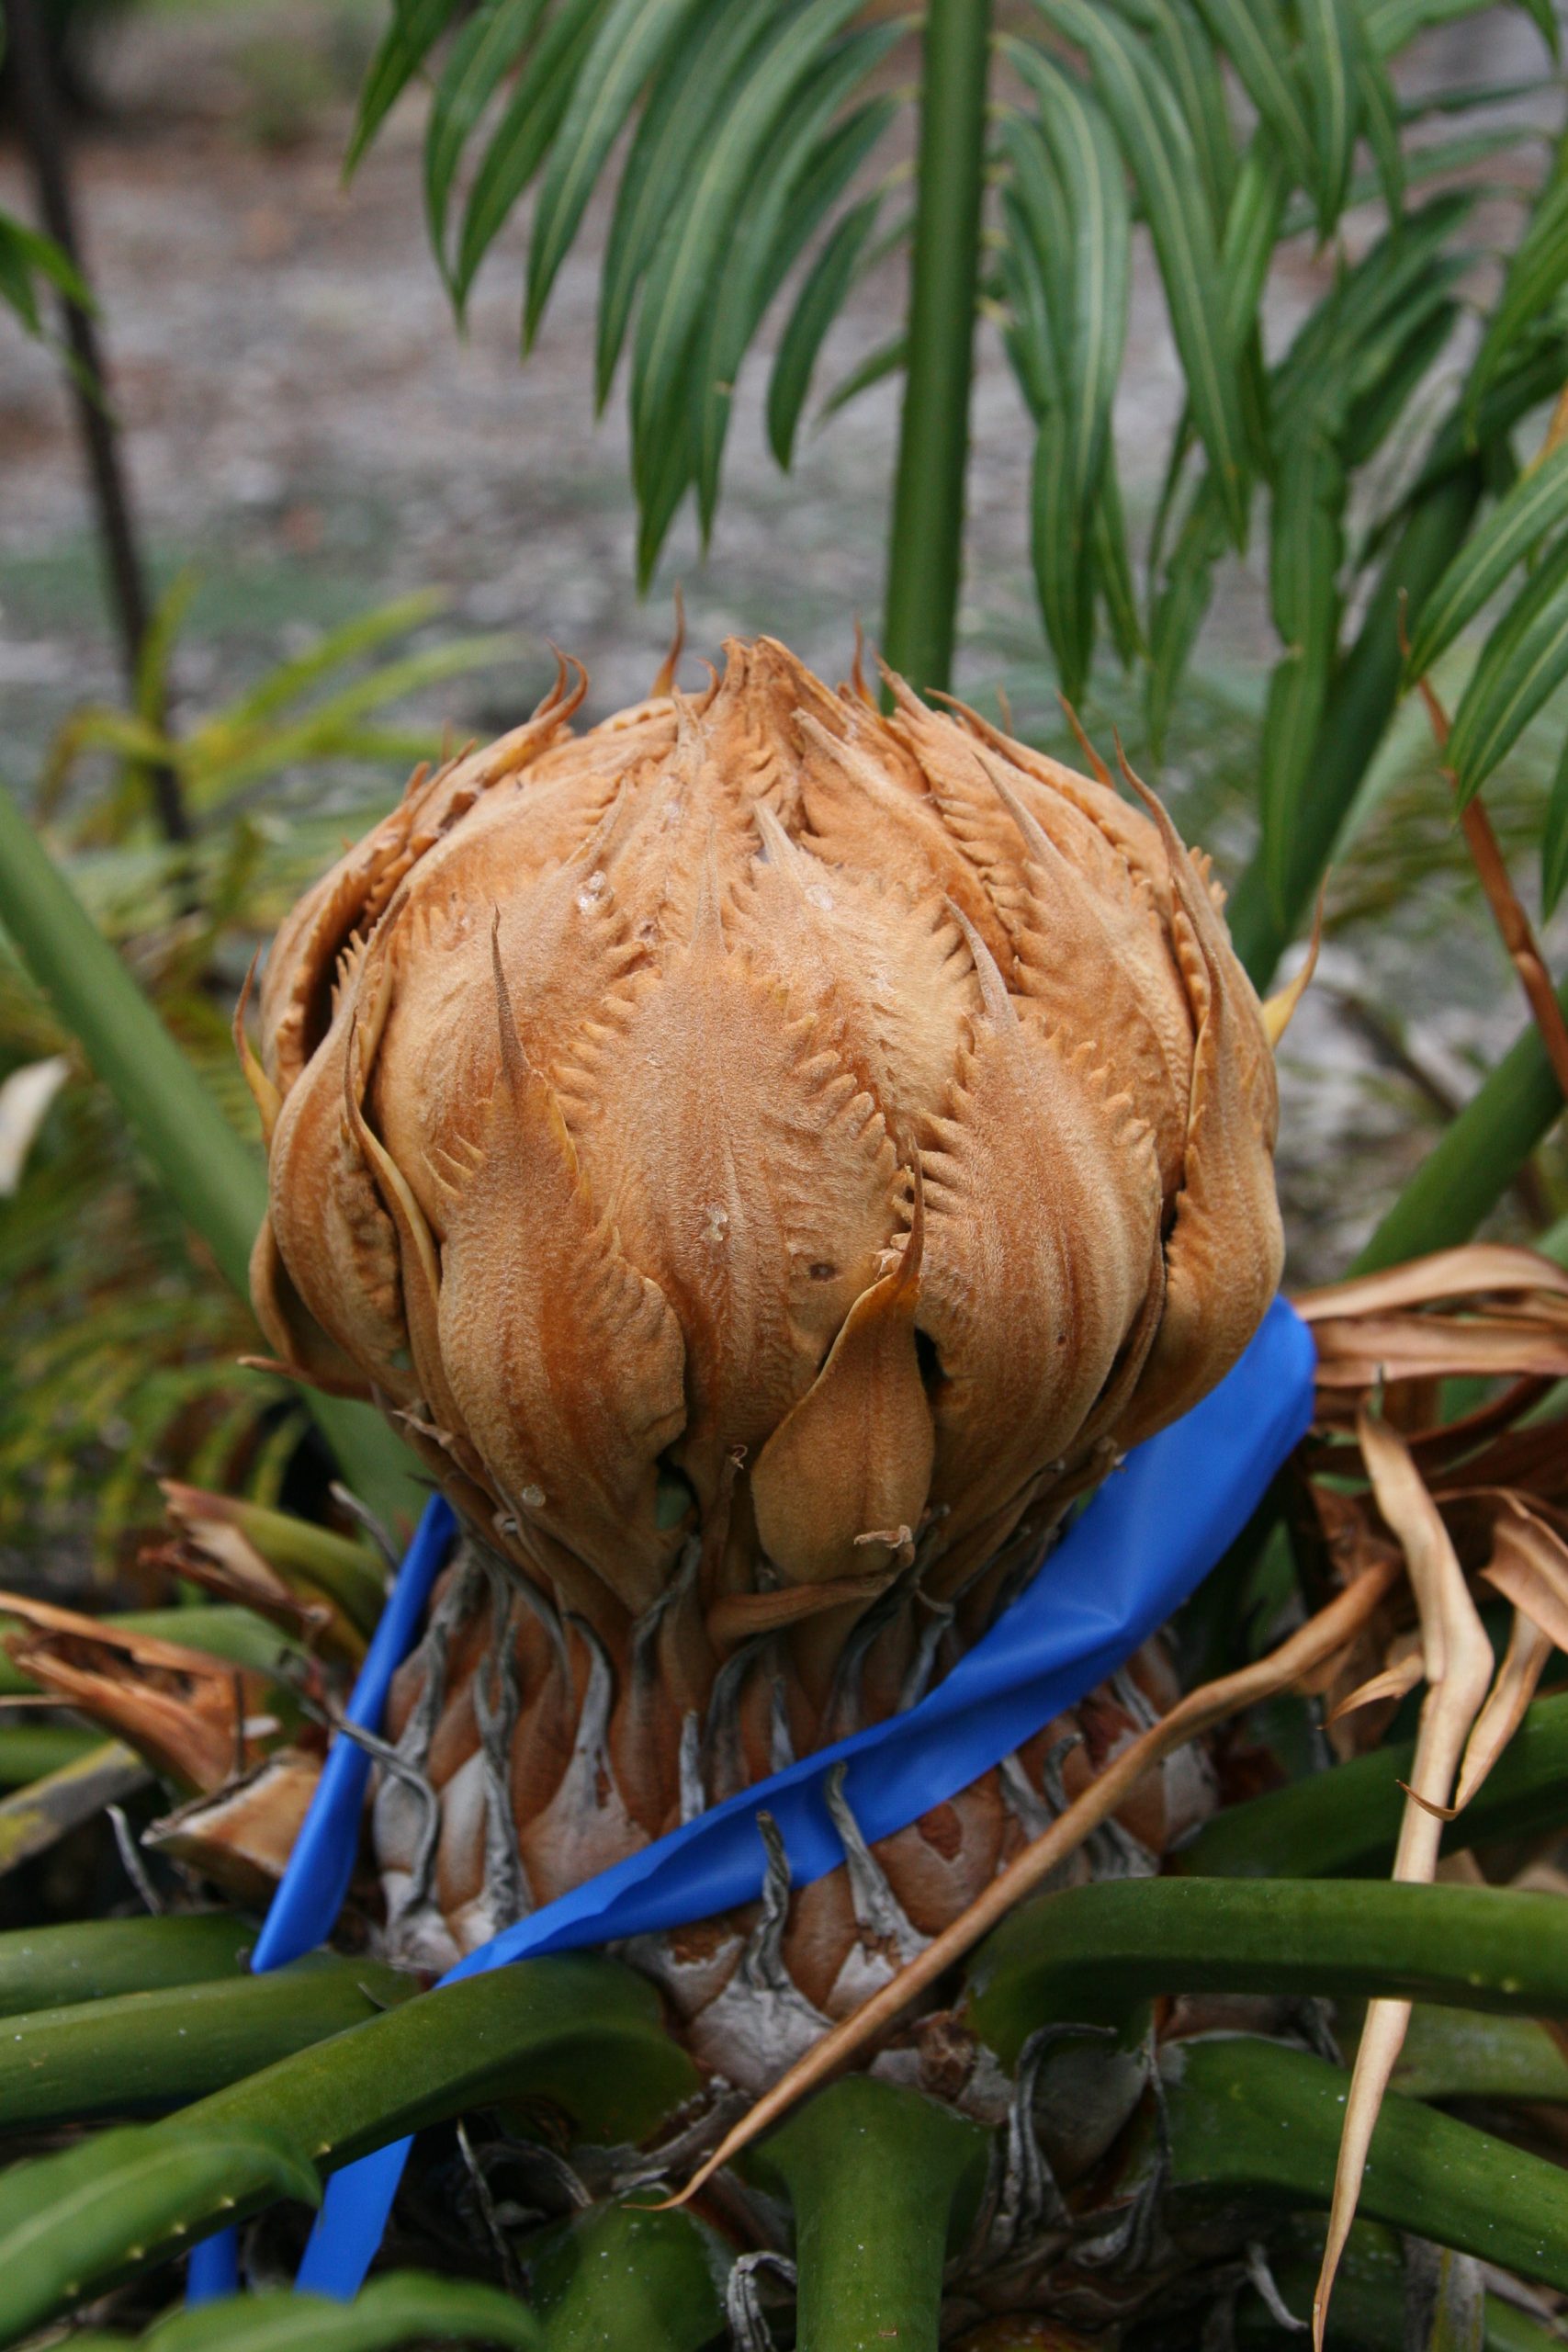 A cycad cone developing on a female plant.